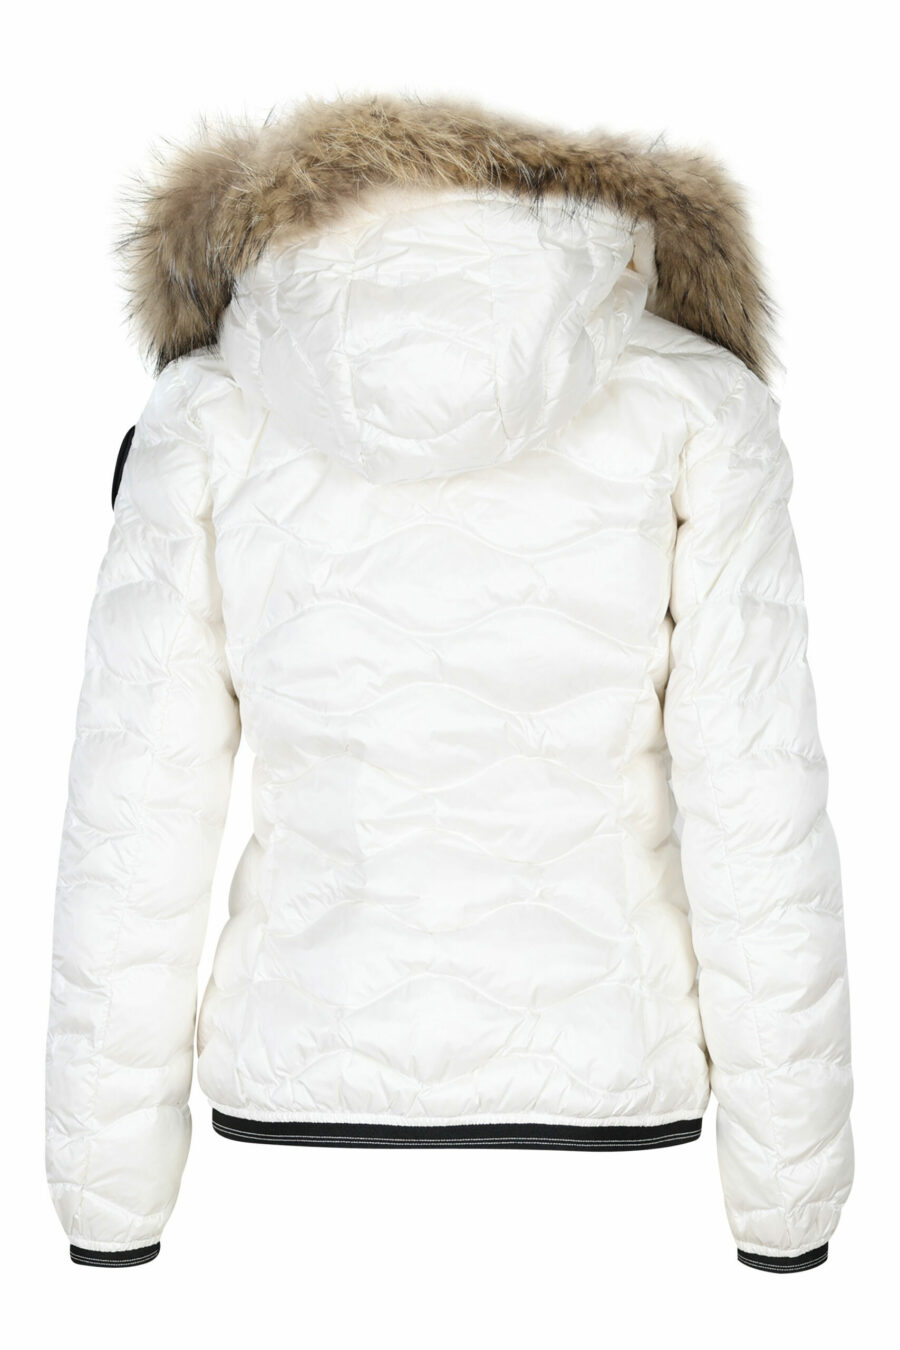 White hooded fur hoodie with wavy lines and logo patch - 8058610692582 2 scaled